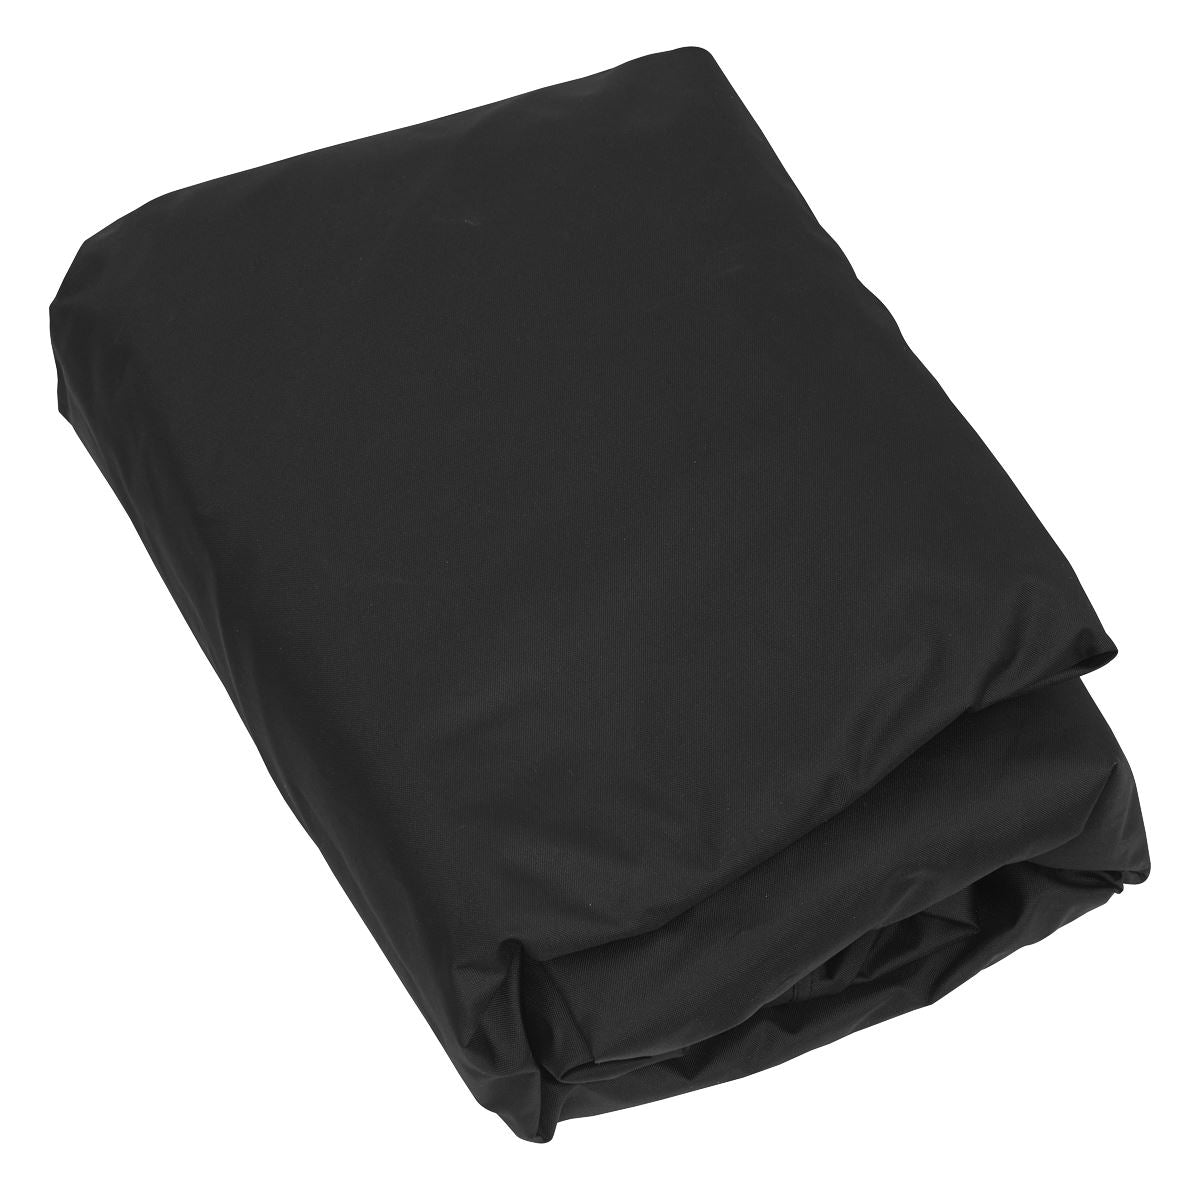 Sealey Trike Cover - X-Large